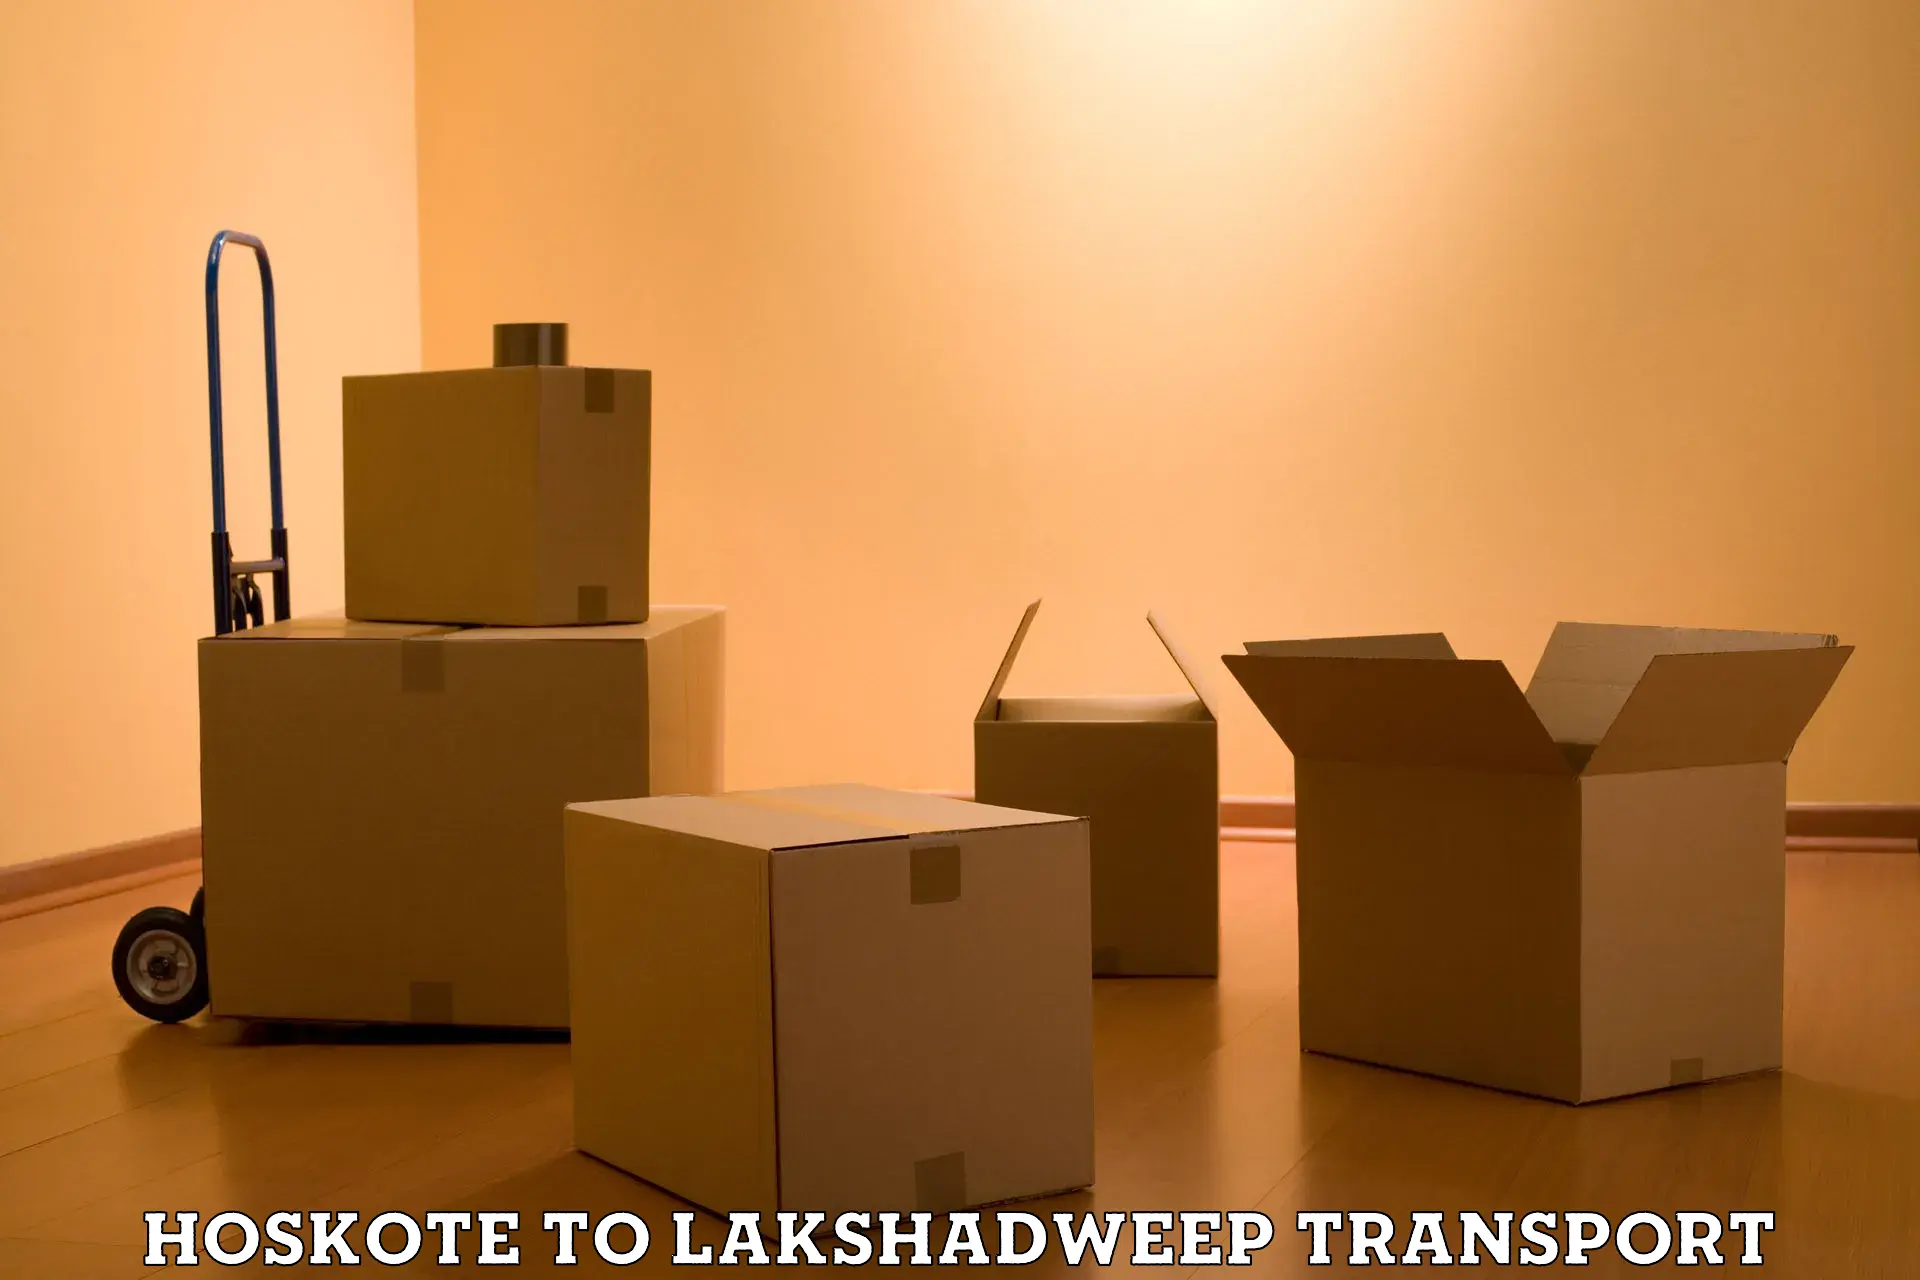 Daily transport service Hoskote to Lakshadweep